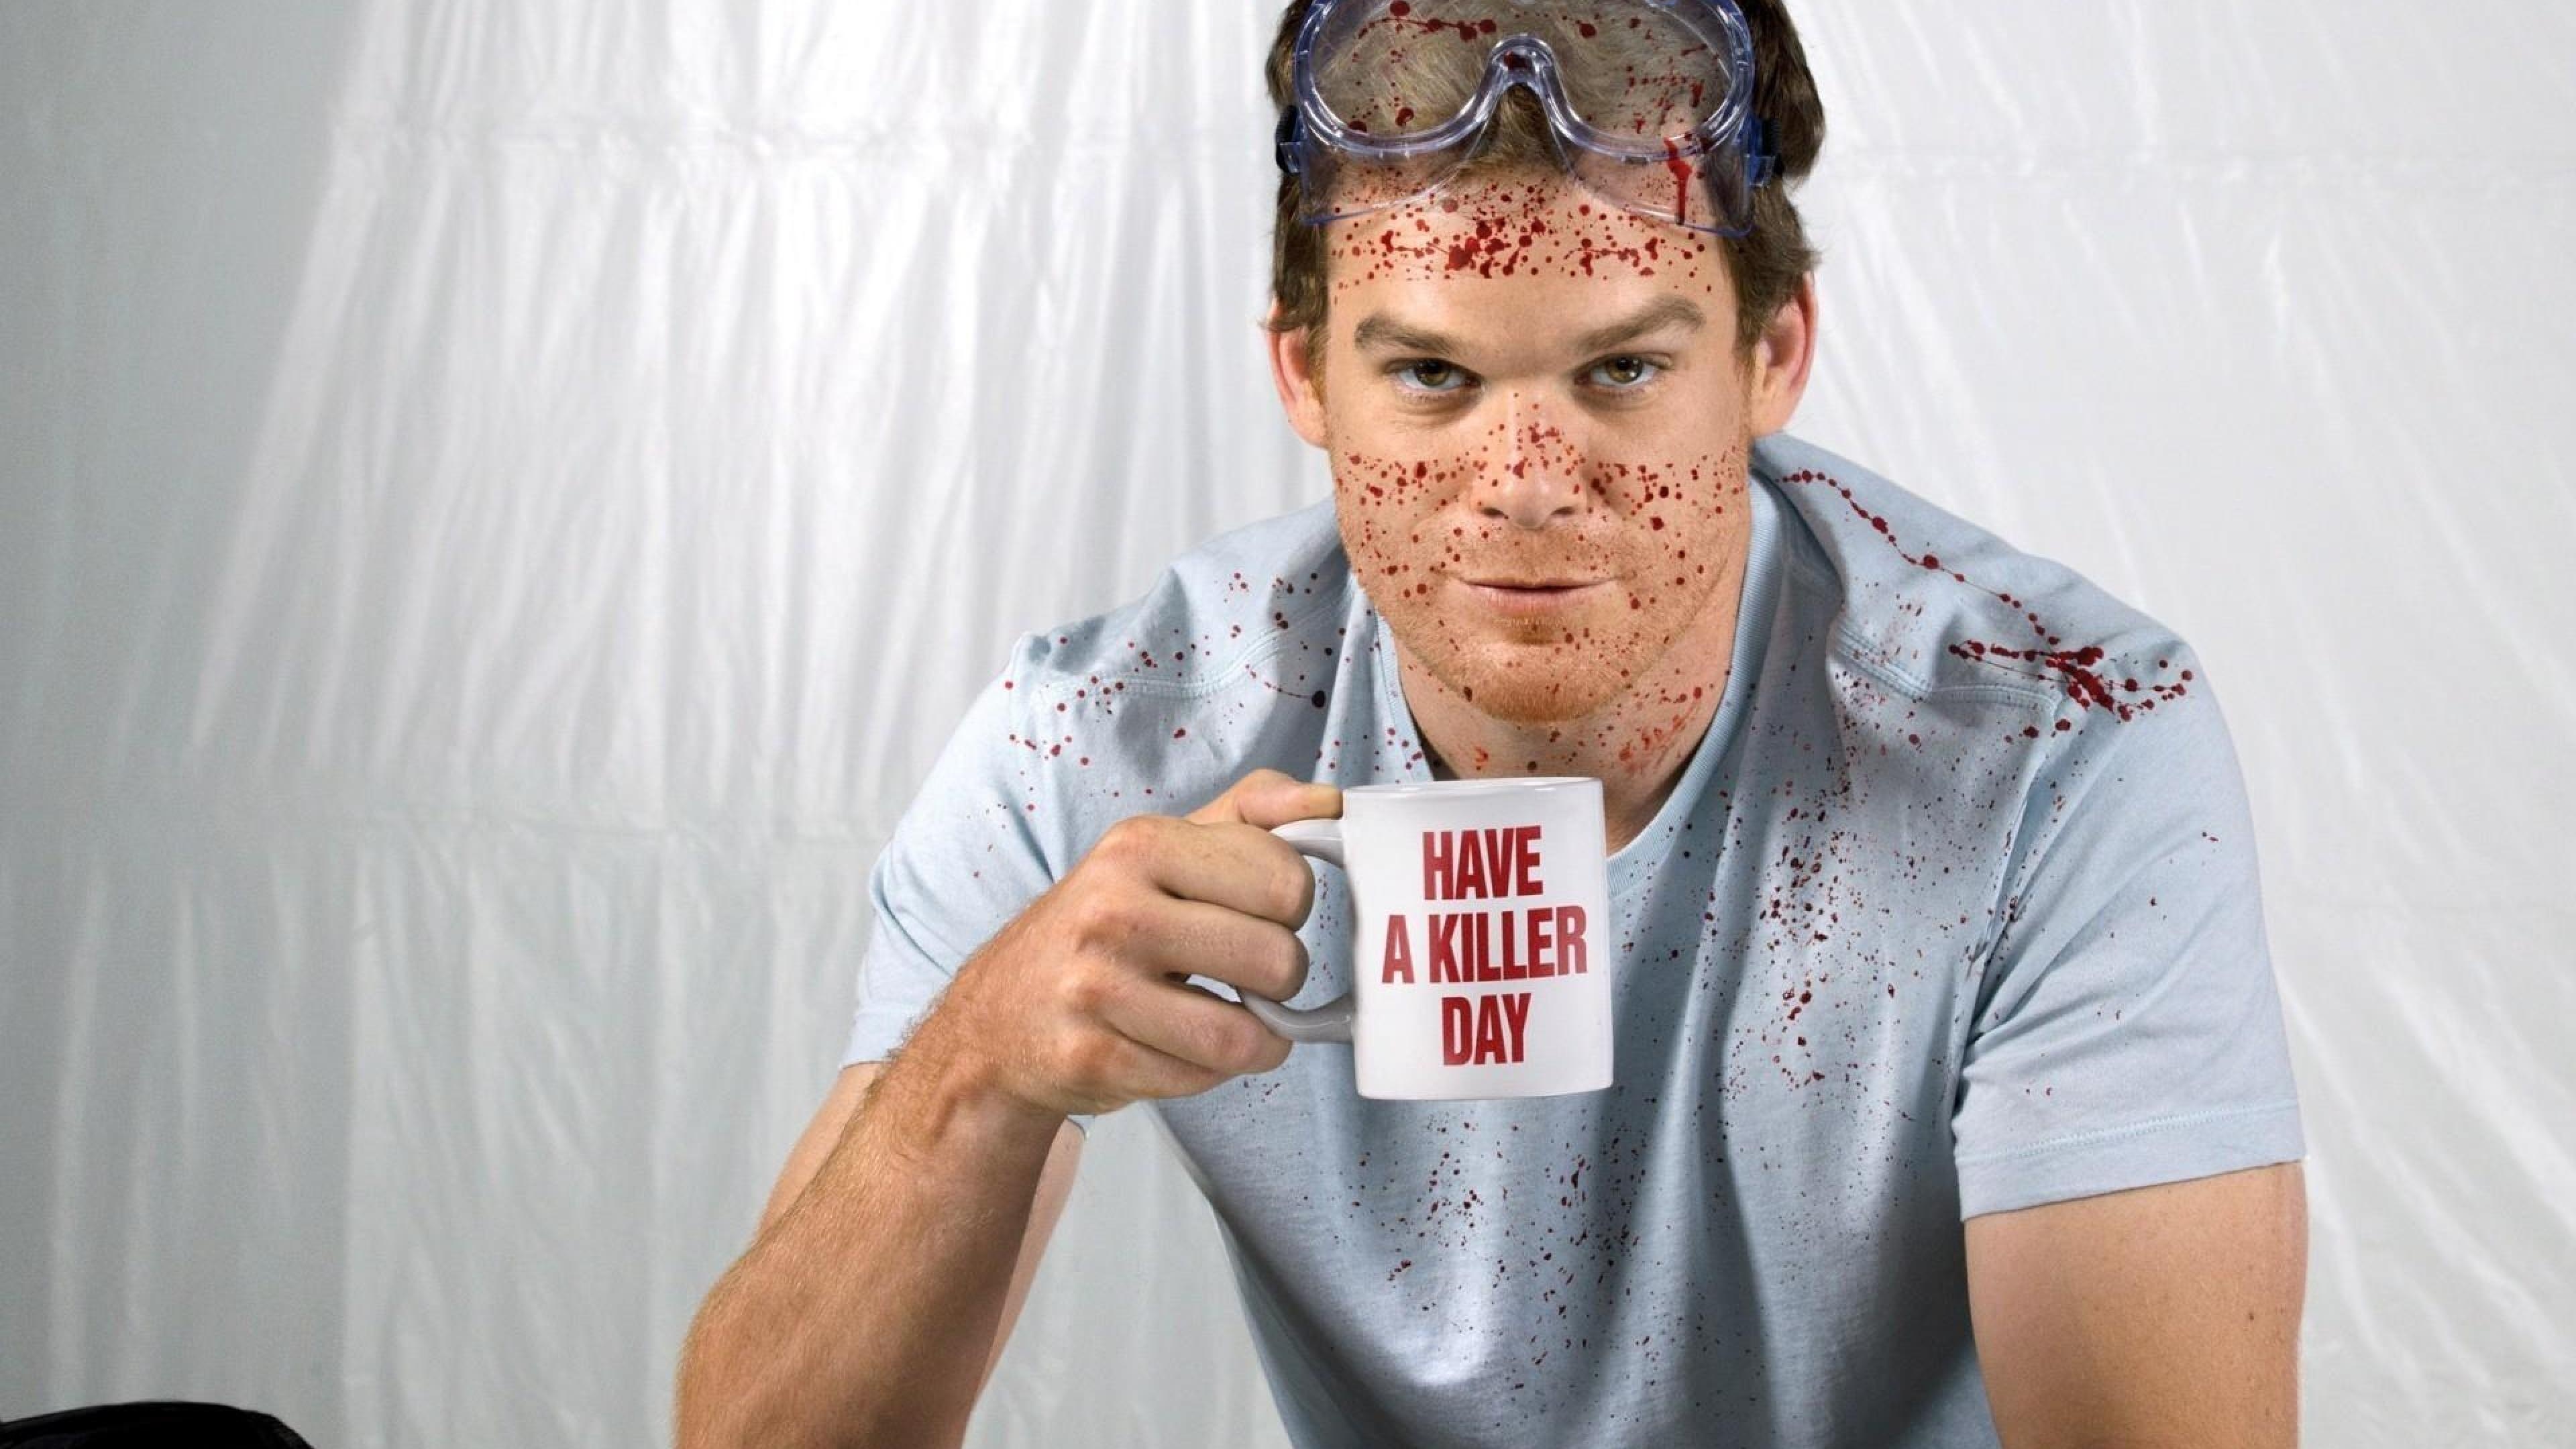 Michael C. Hall: Portrayed David Fisher in the HBO drama series Six Feet Under. 3840x2160 4K Background.